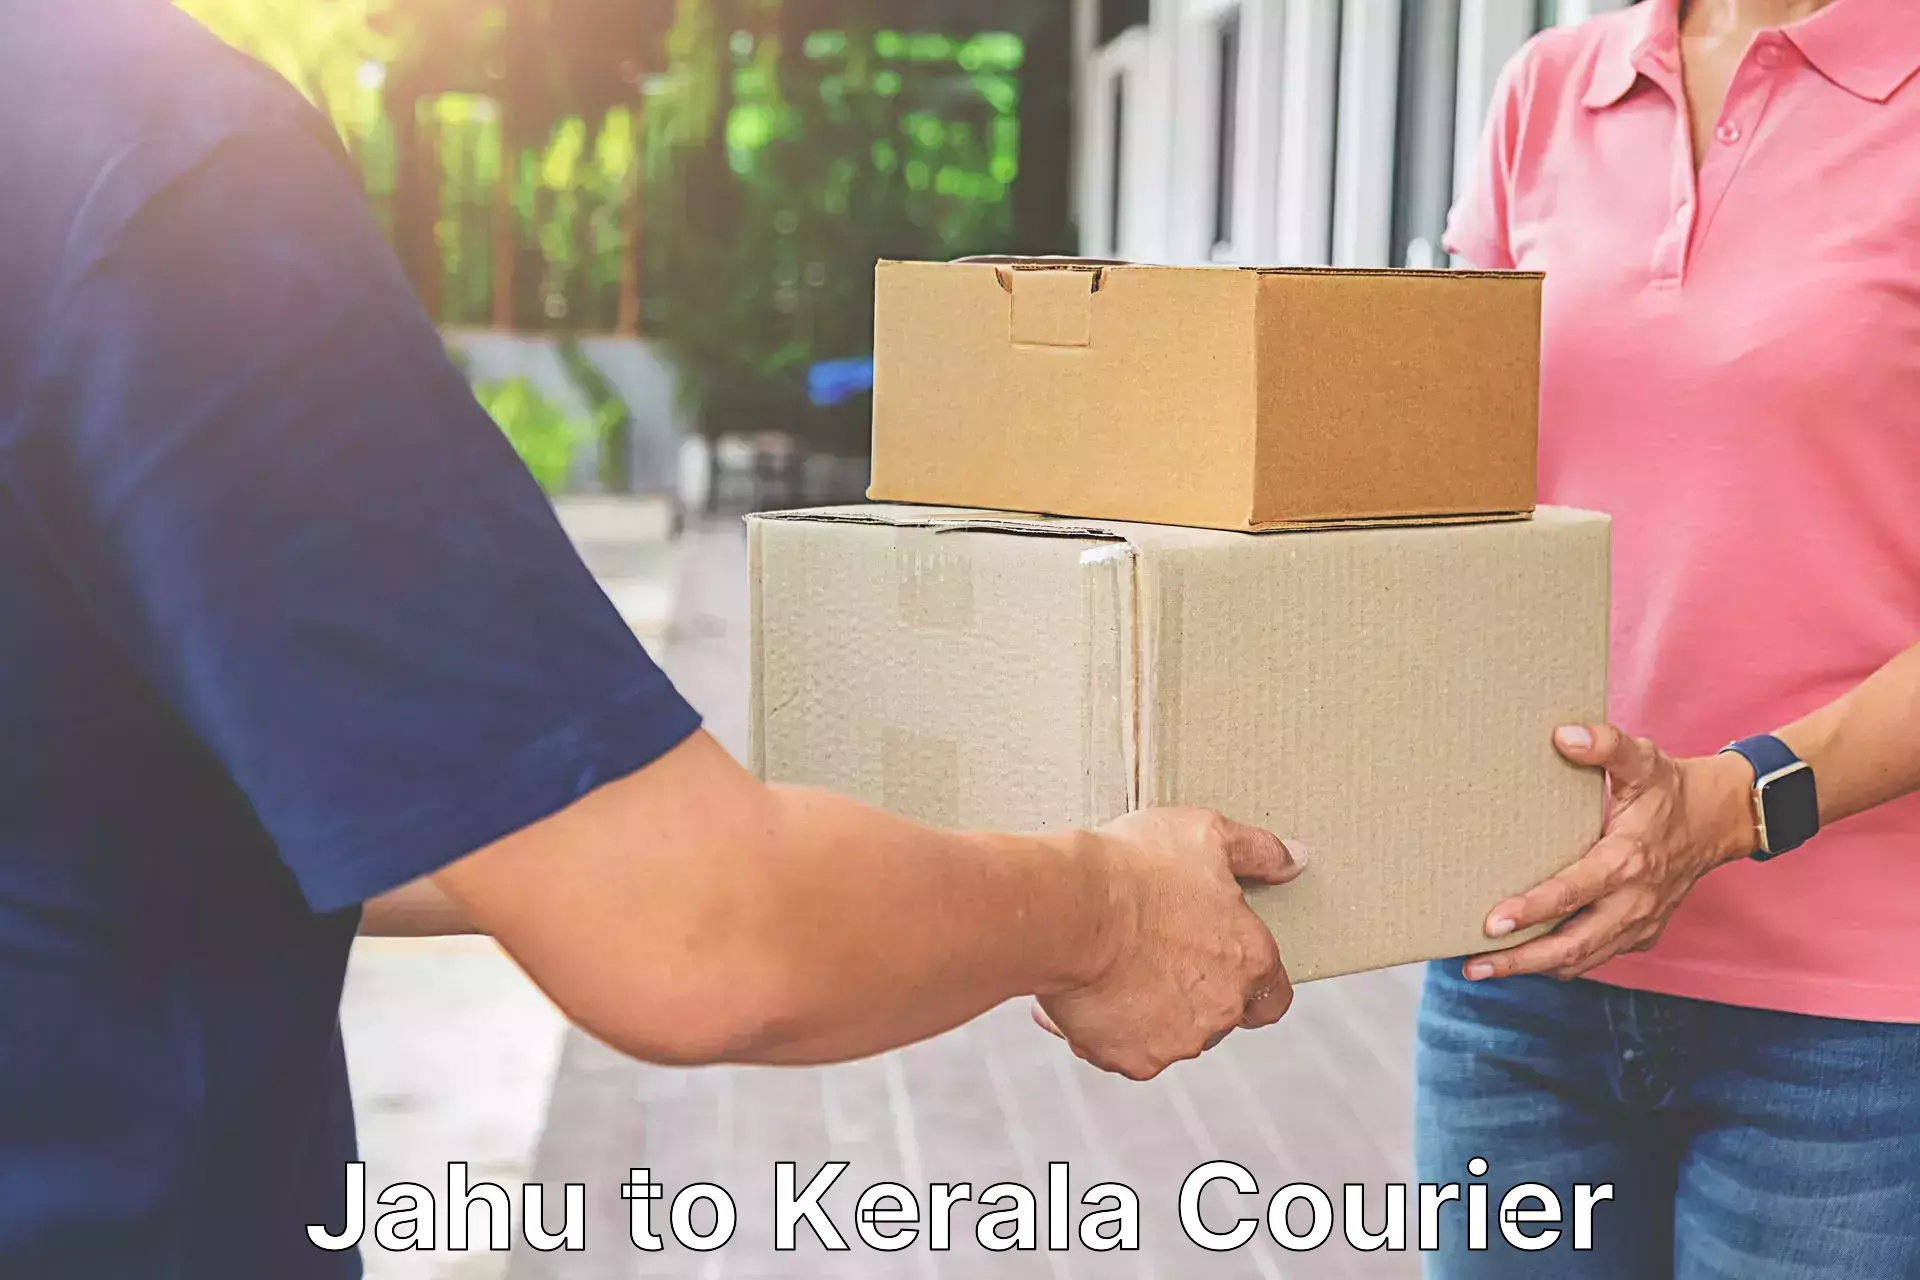 Affordable parcel service Jahu to Cochin Port Kochi